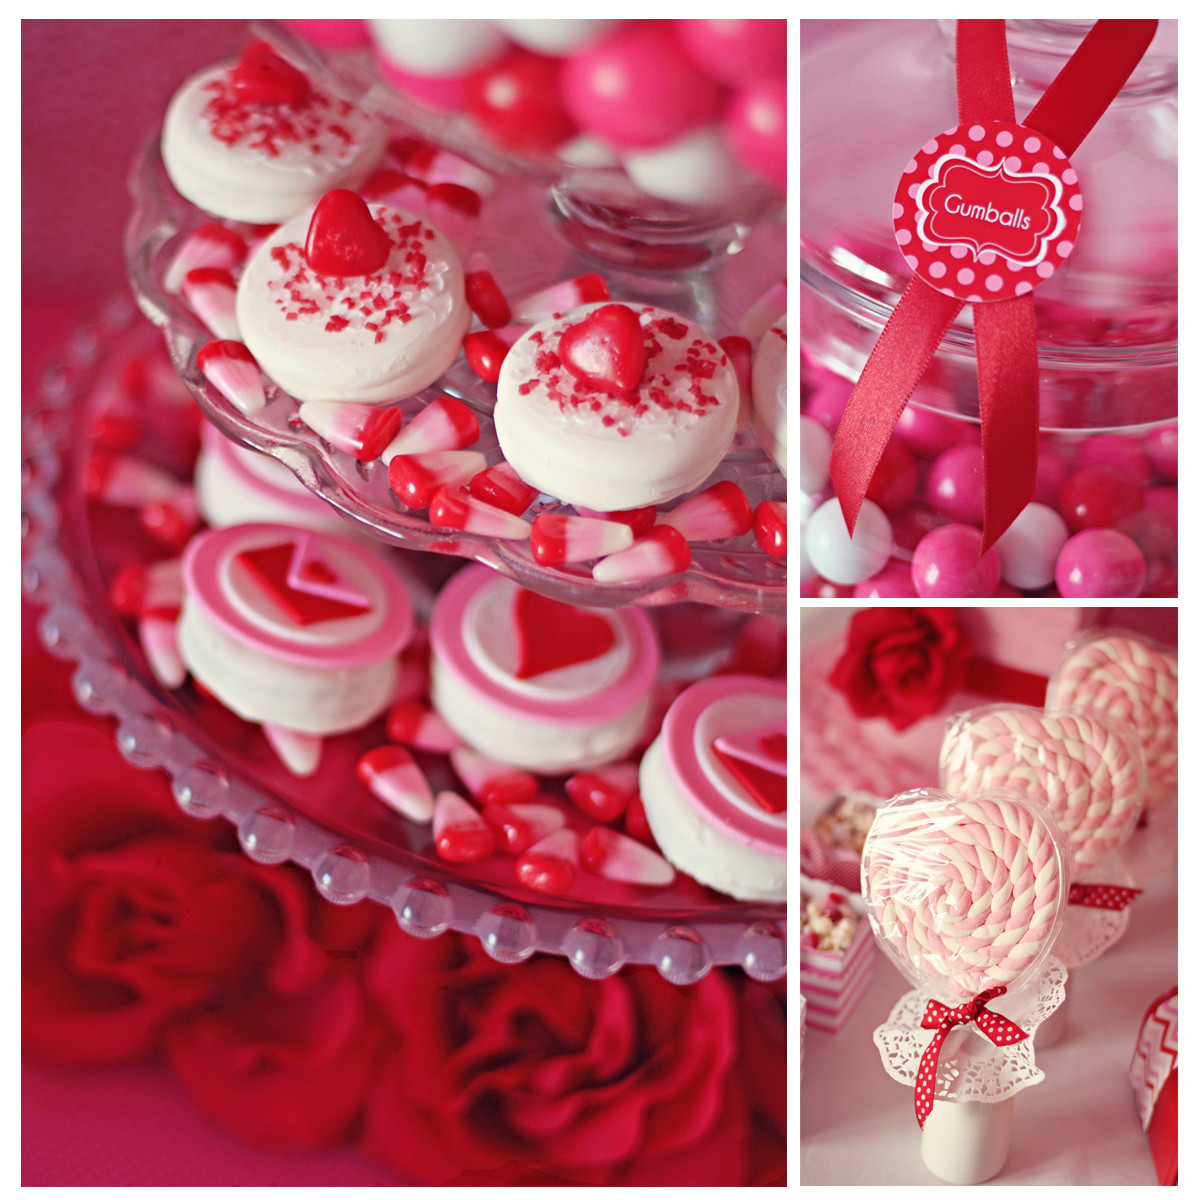 Valentine Birthday Party Ideas
 Amanda s Parties To Go Valentines Party Table Ideas